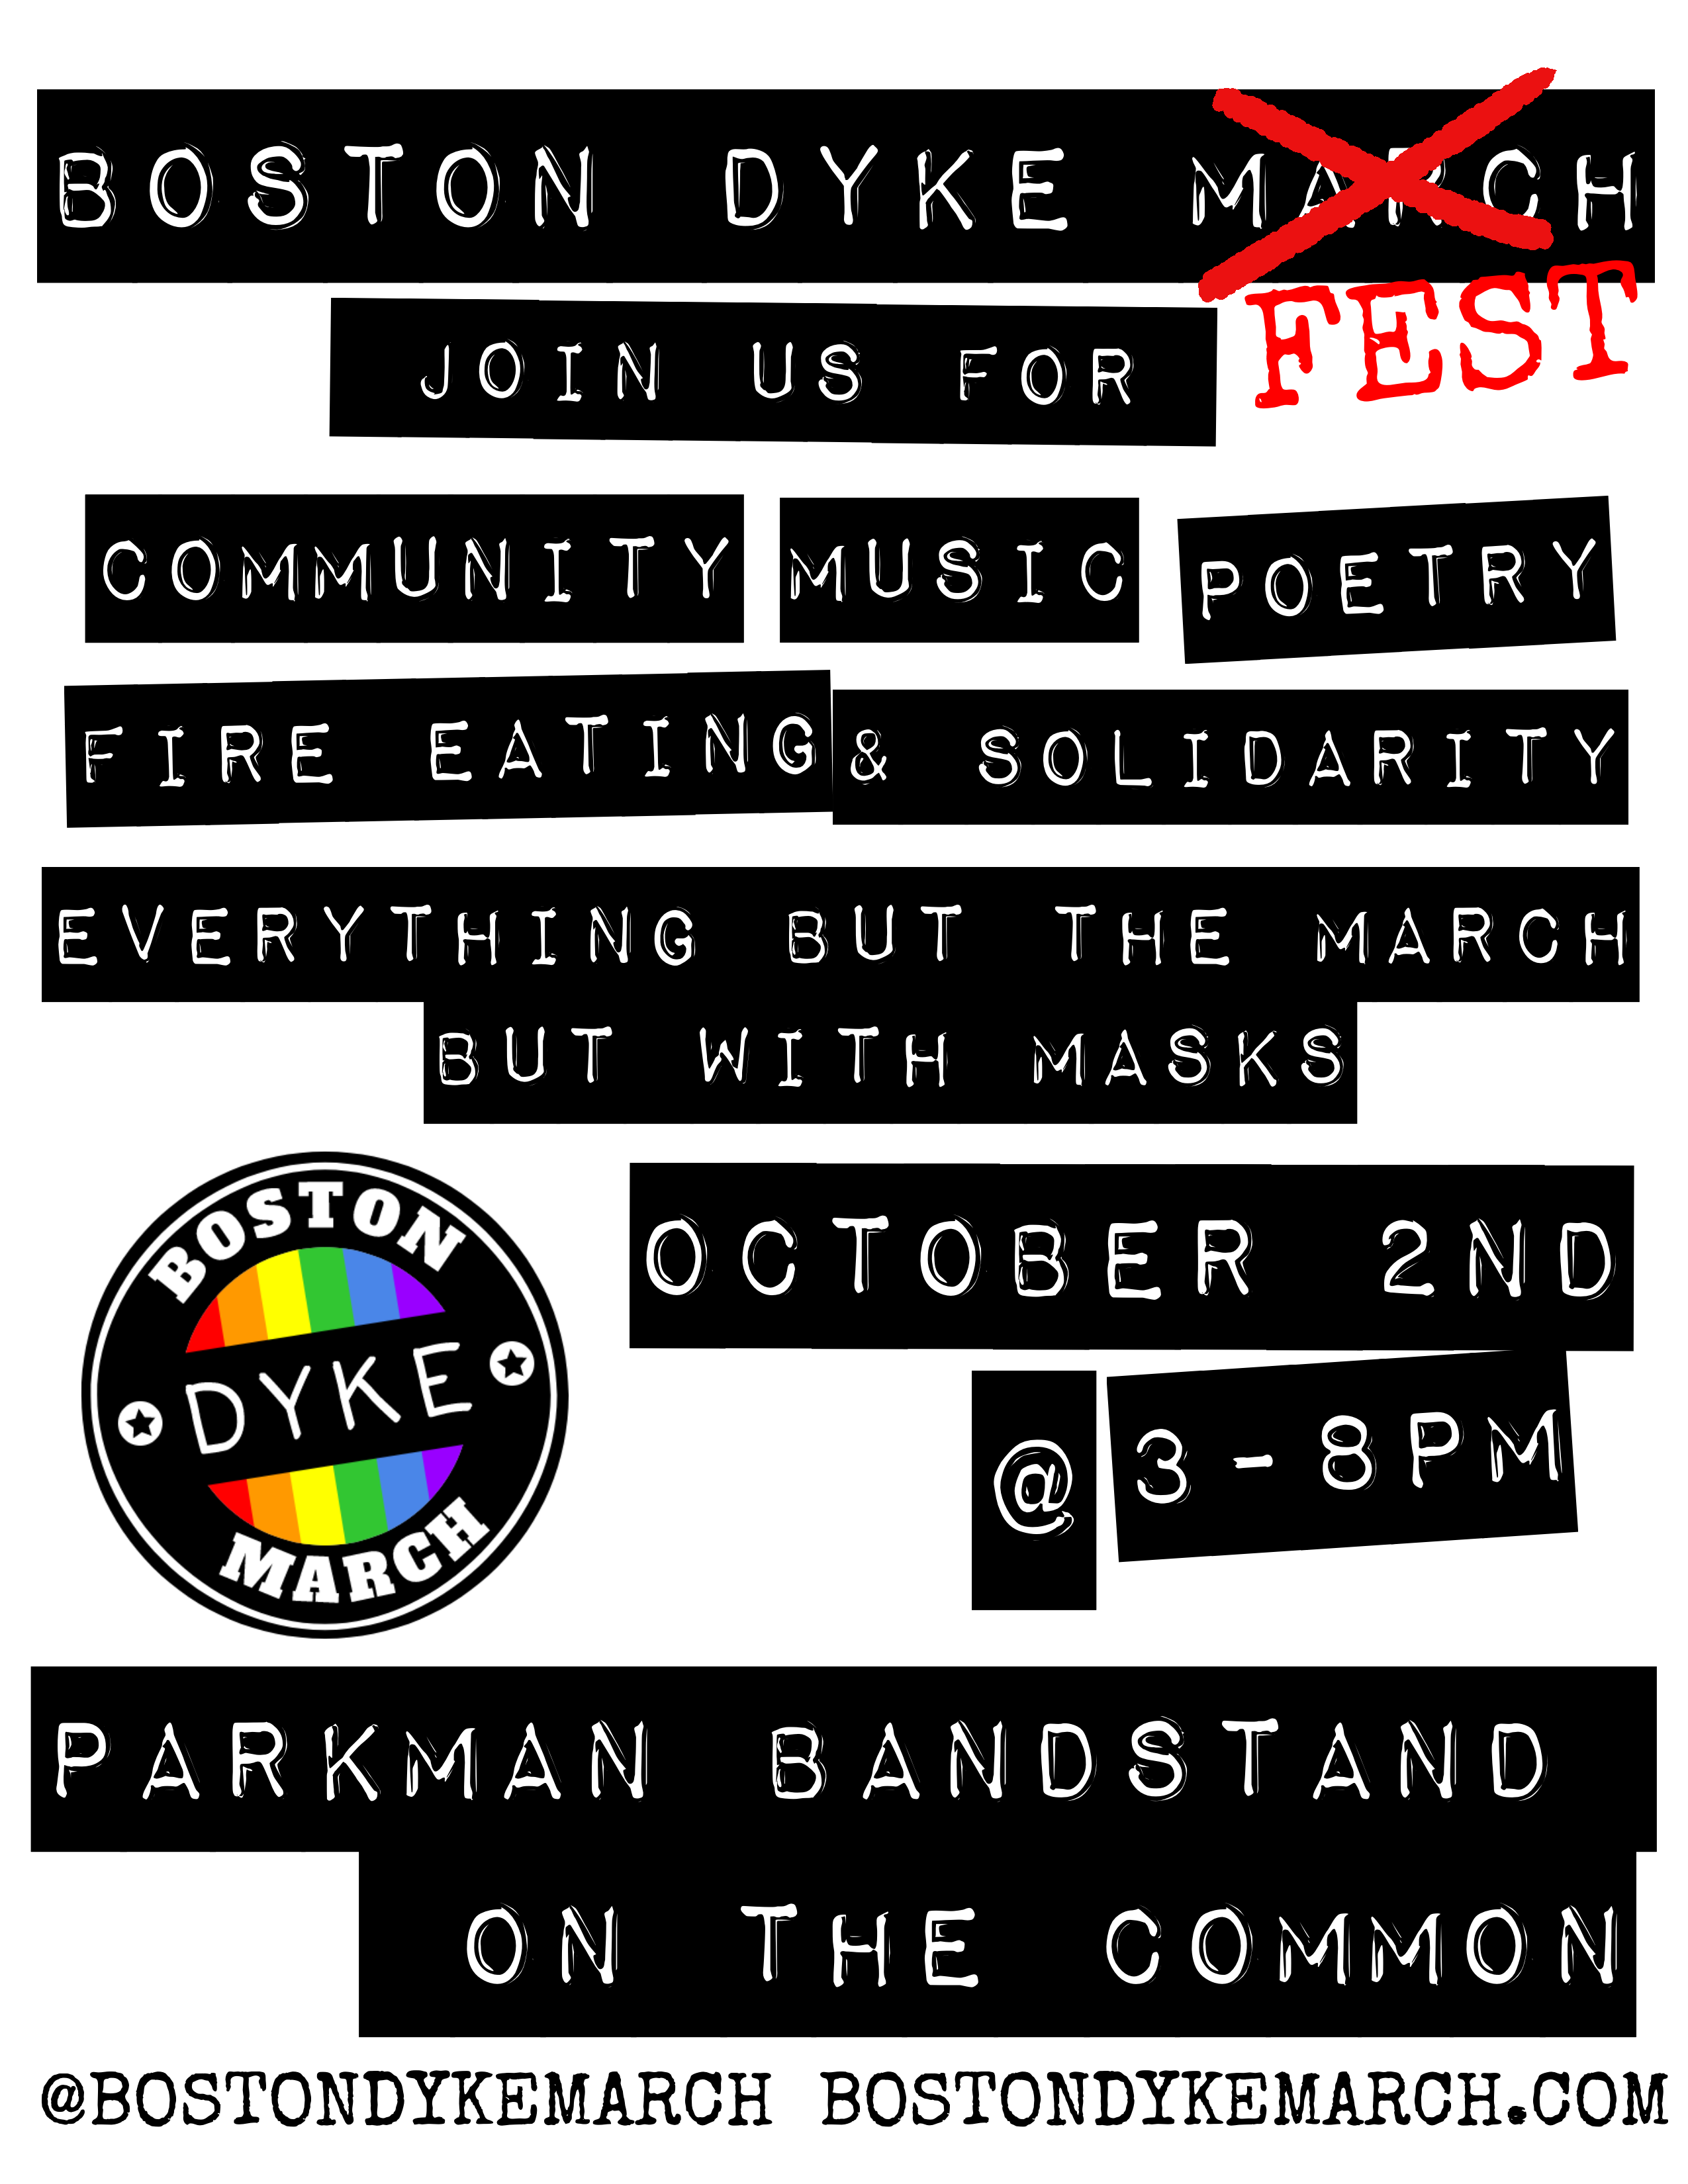 Poster for Boston Dyke Fest.White text on black bars. It says Boston Dyke March with march crossed out and replaced by Fest. Underneath: join us for community music poetry fire eating and solidarity. Everything but the March but with Masks. October 2nd 3-8pm Parkman bandstand on the common. Also has the dyke march logo, website, and Twitter/insta handle